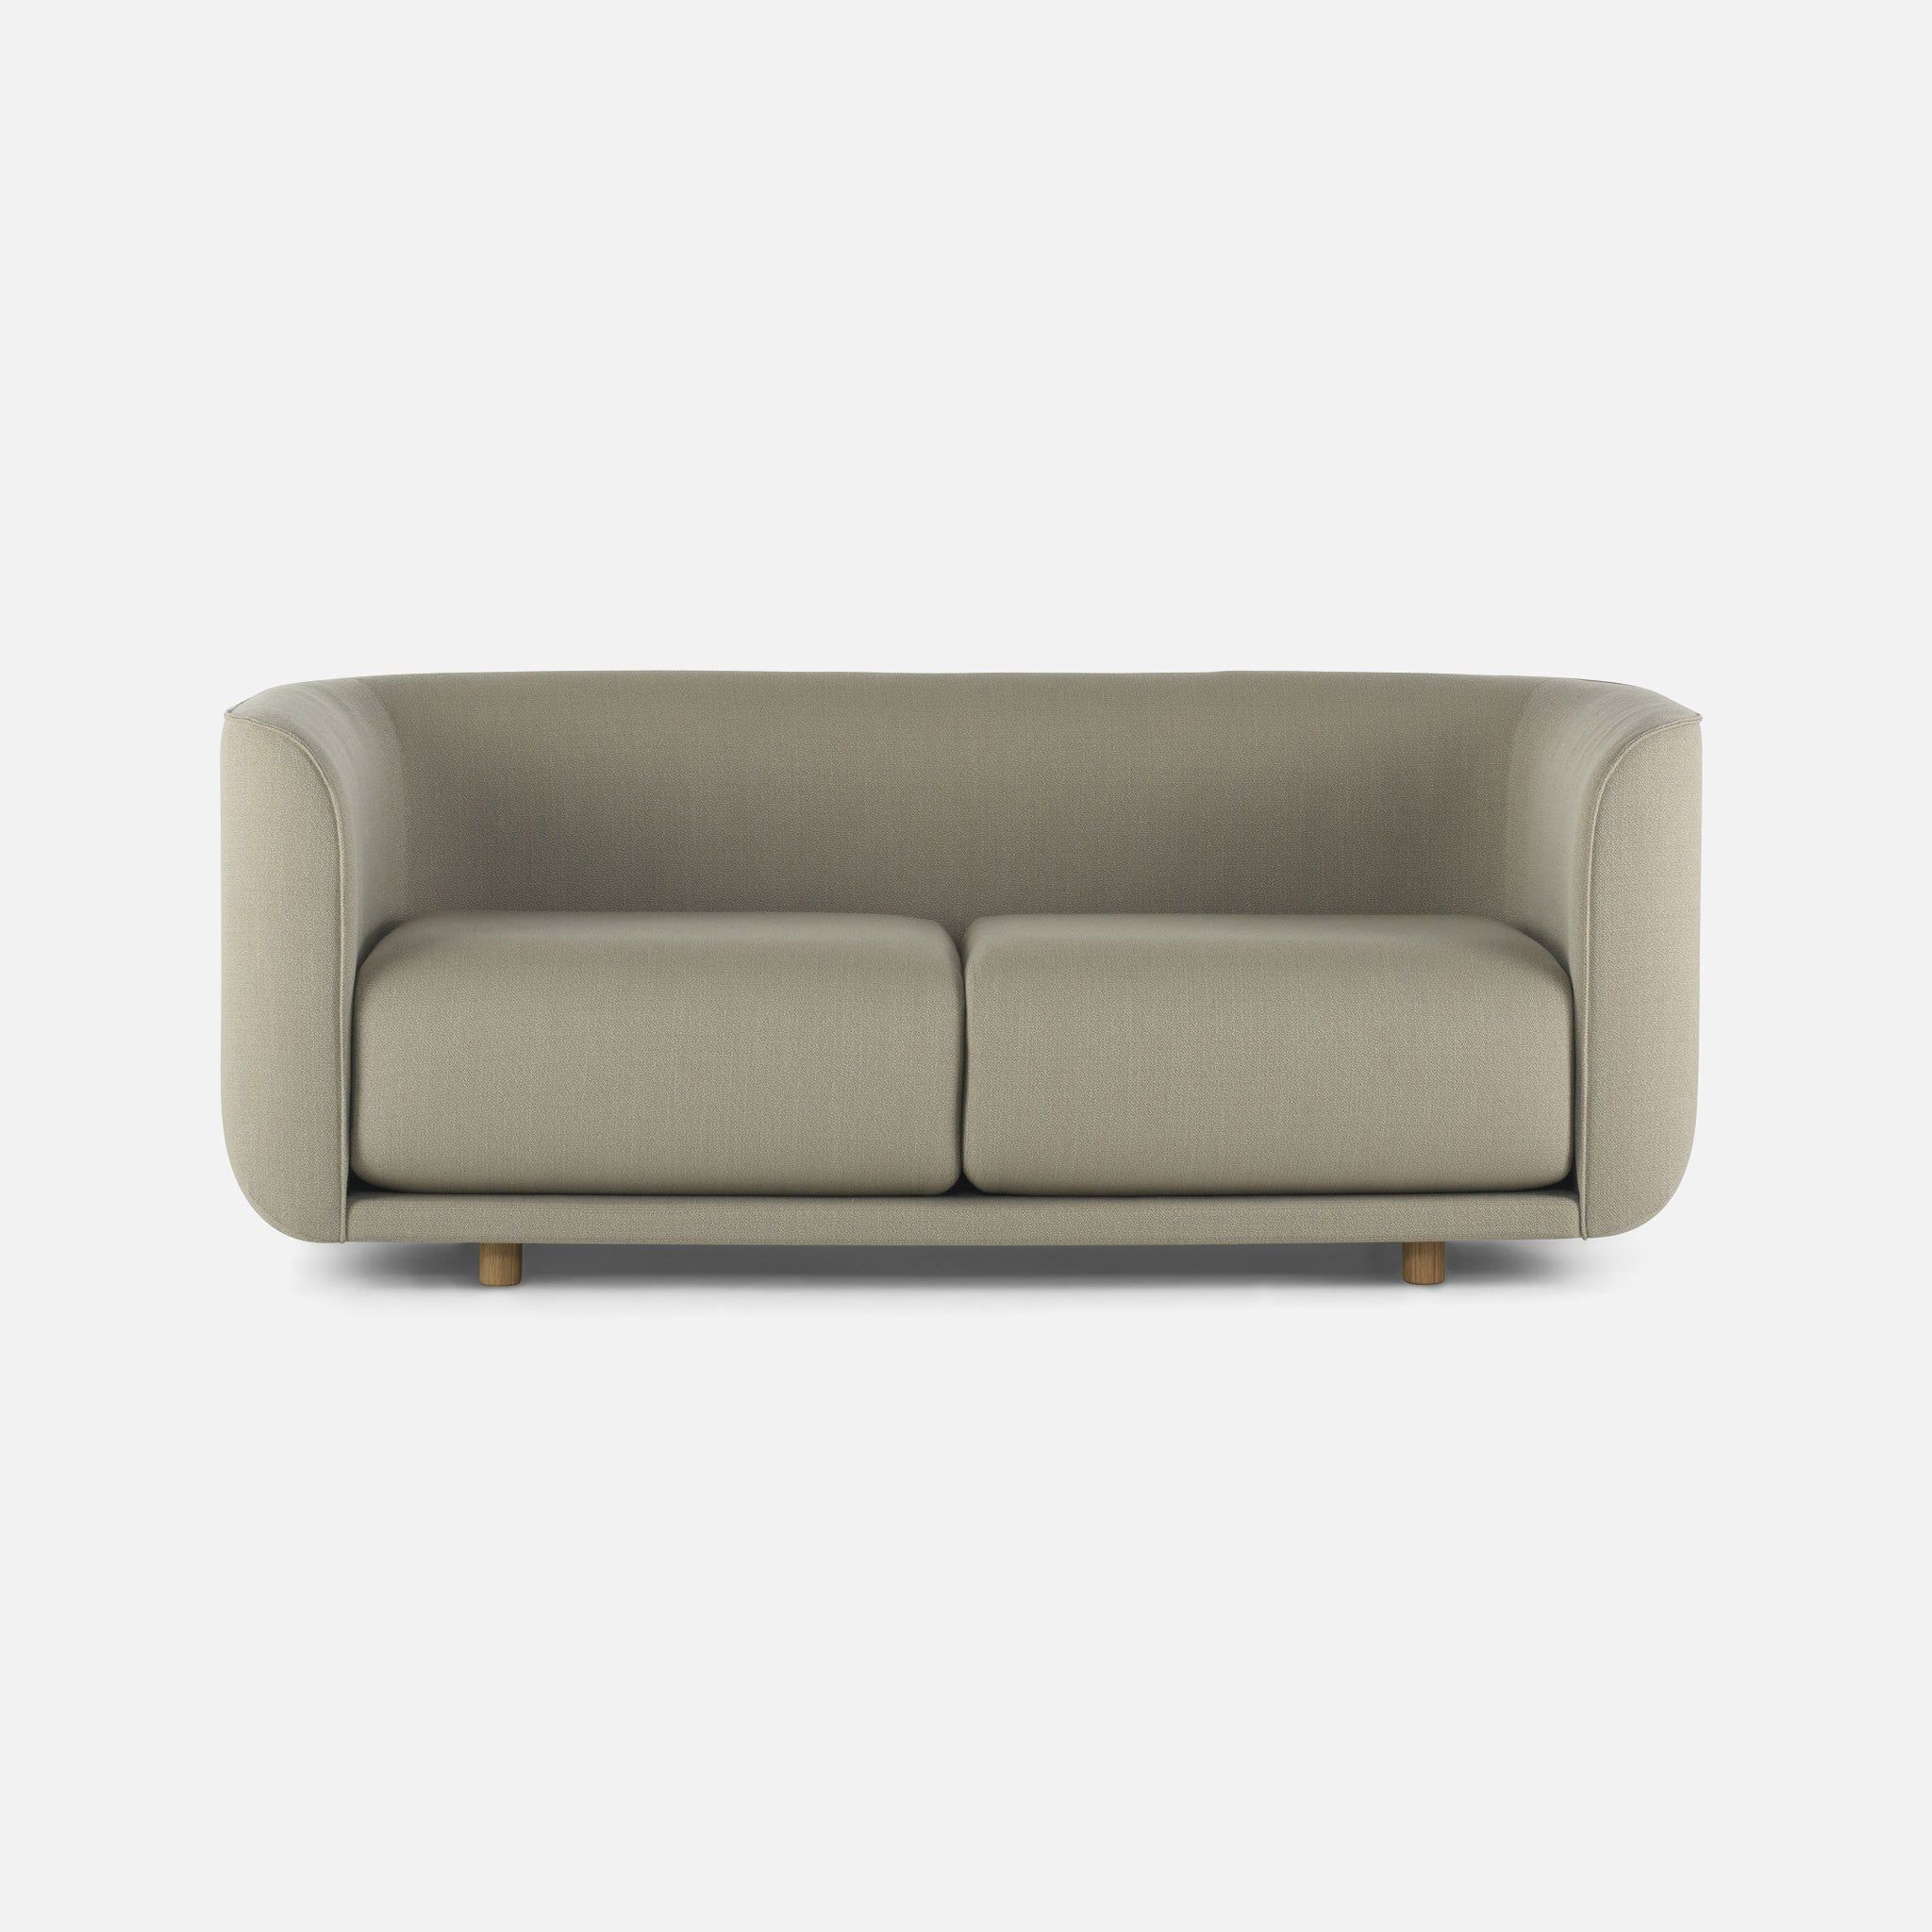 2 Seater Sofa Compact Comfort: The Perfect Sofa for Two